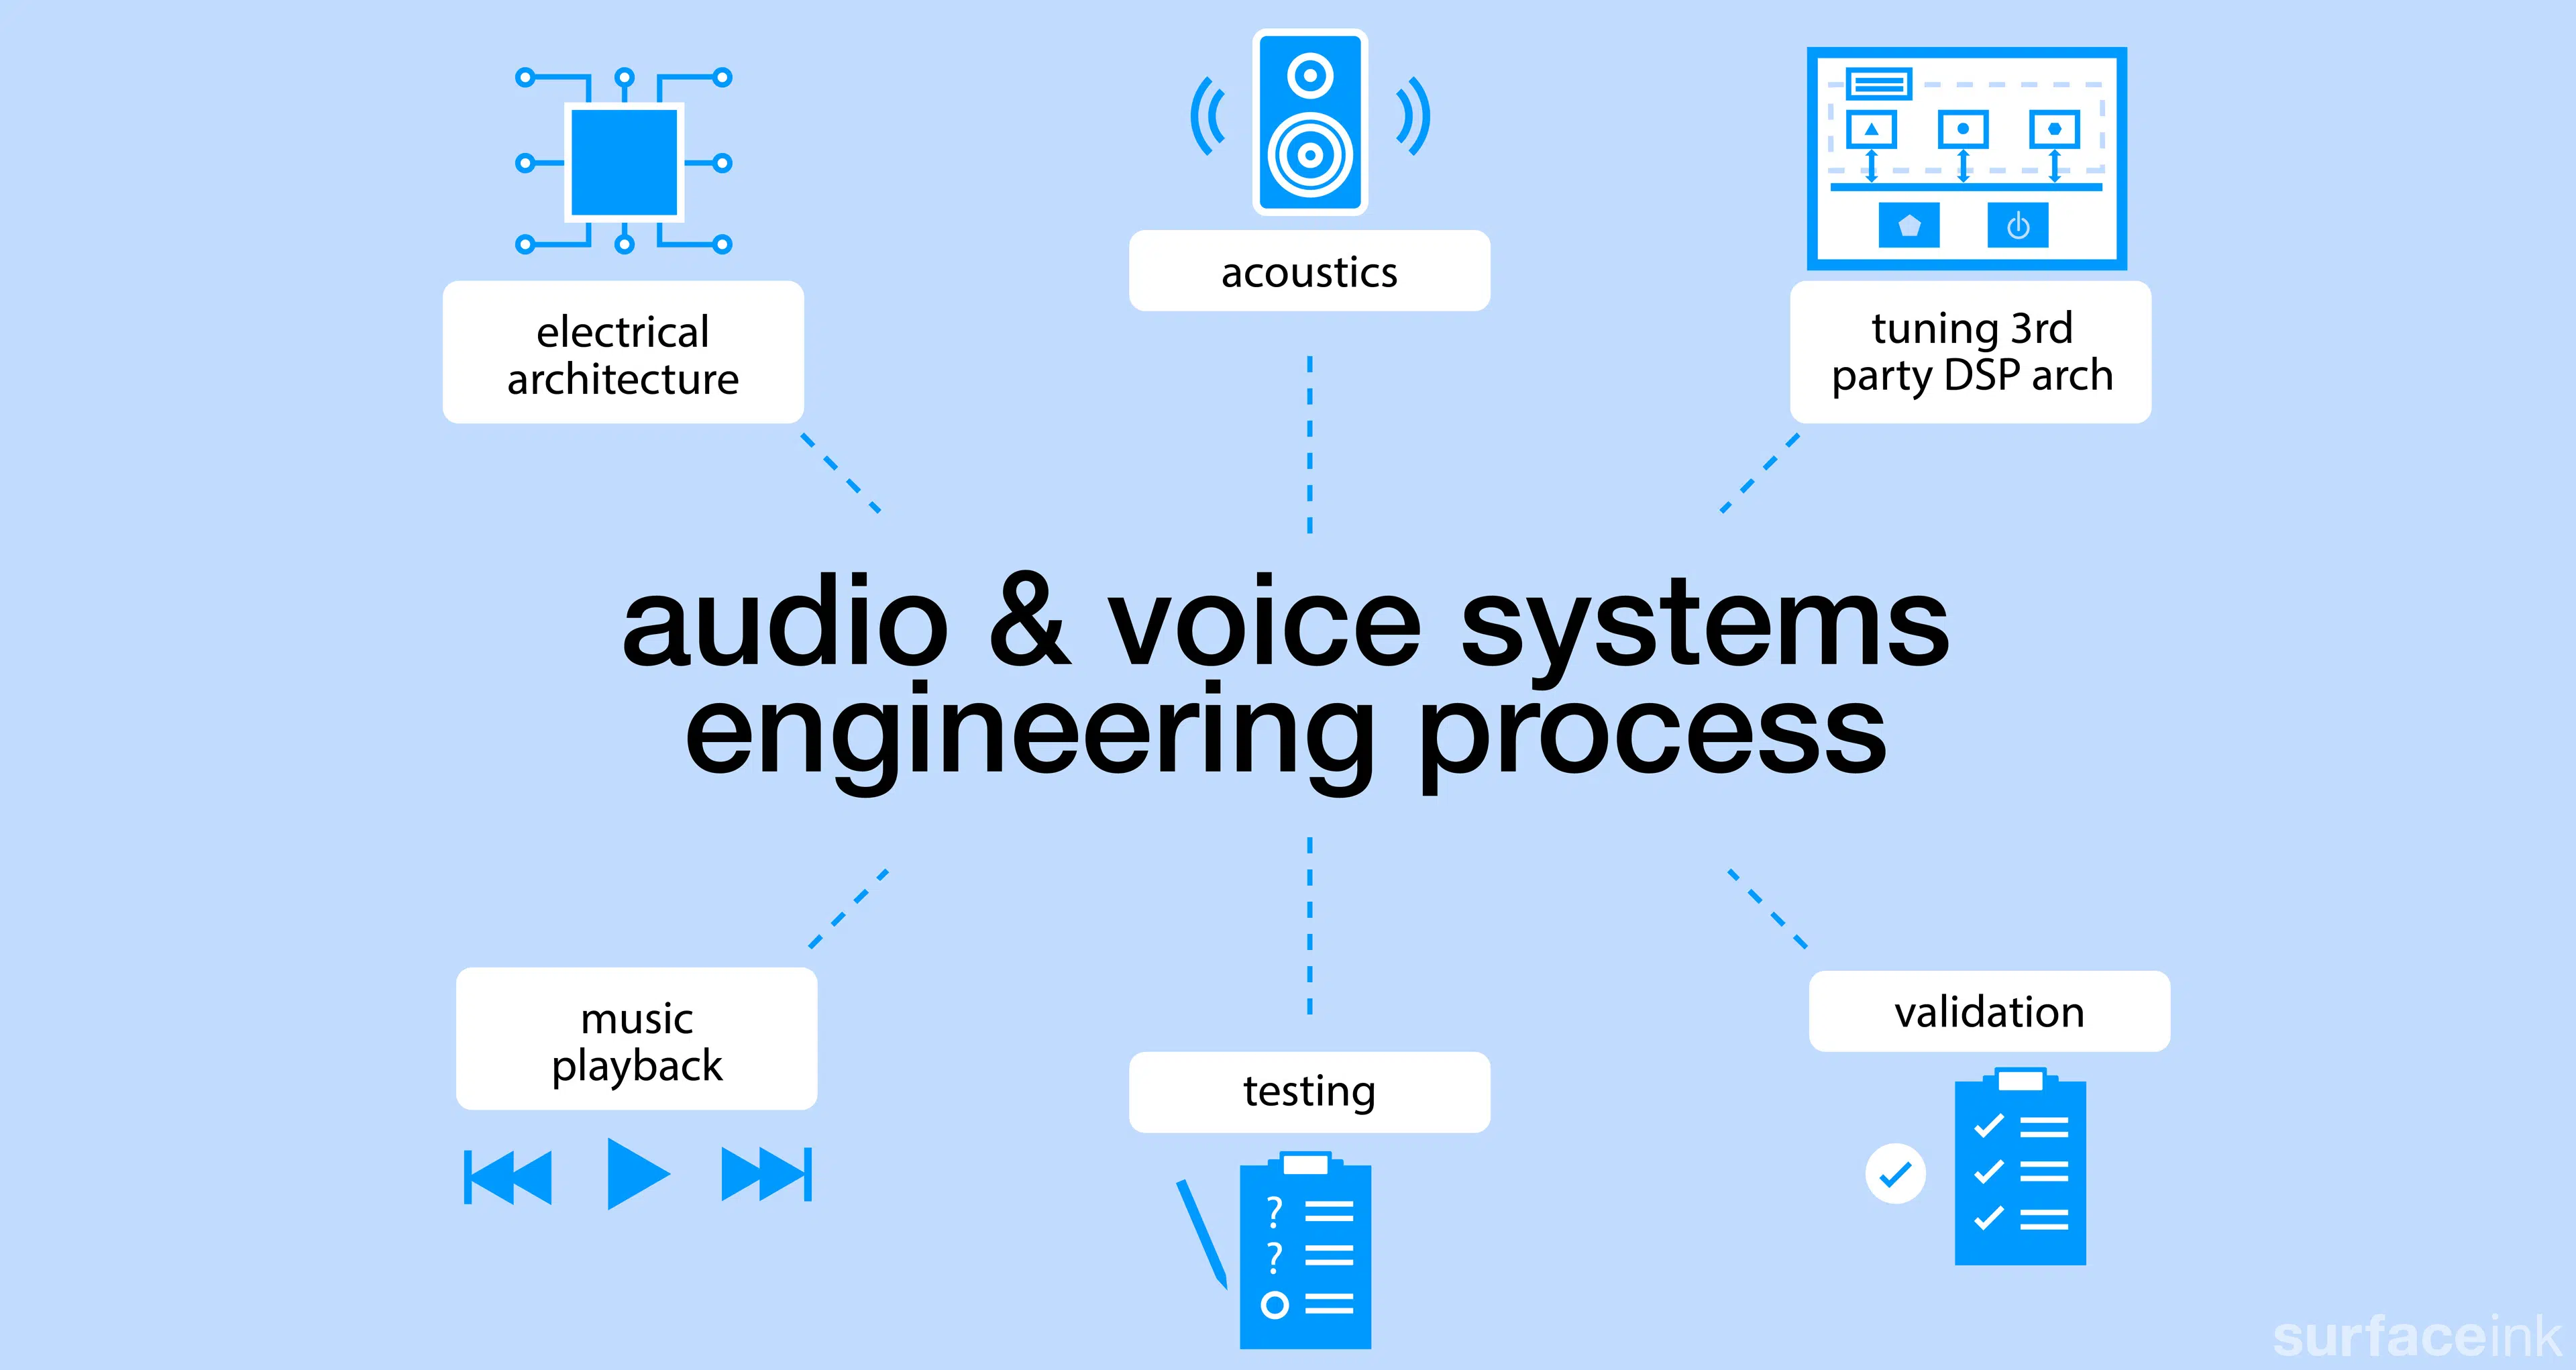 surfaceink-services-processes-illustration_7-audio-voice-sysems-engineering